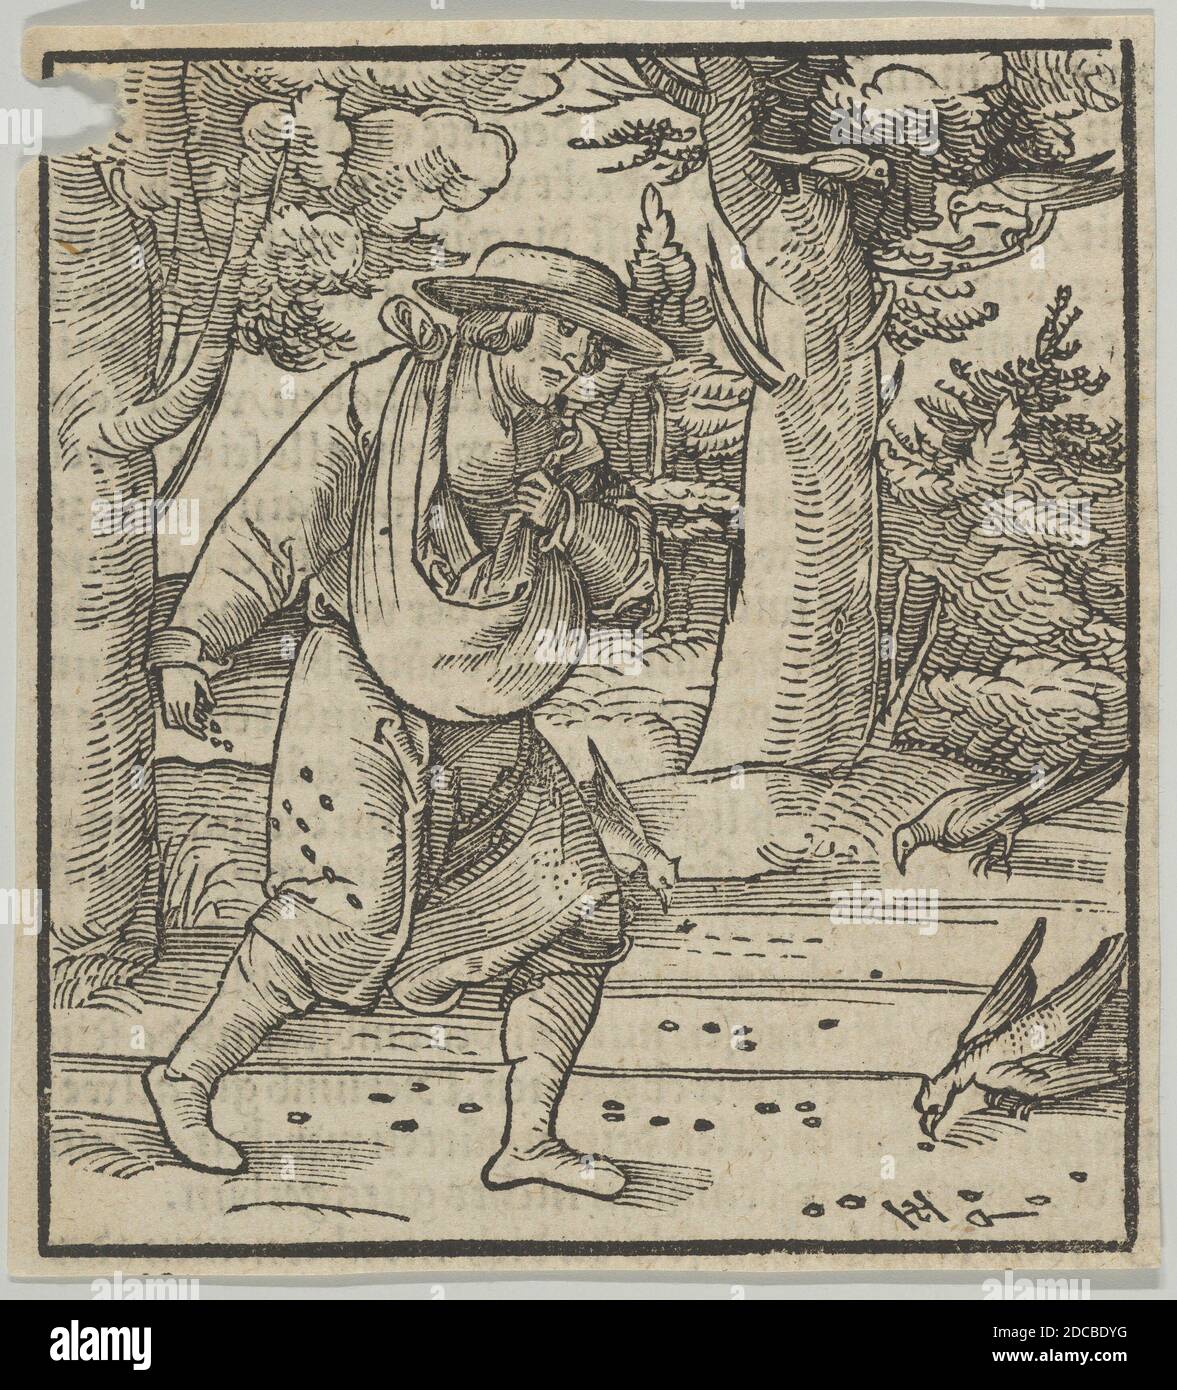 The Birds Eating the Seeds of the Sower, from Hymmelwagen auff dem, wer wol lebt..., 1517. Stock Photo